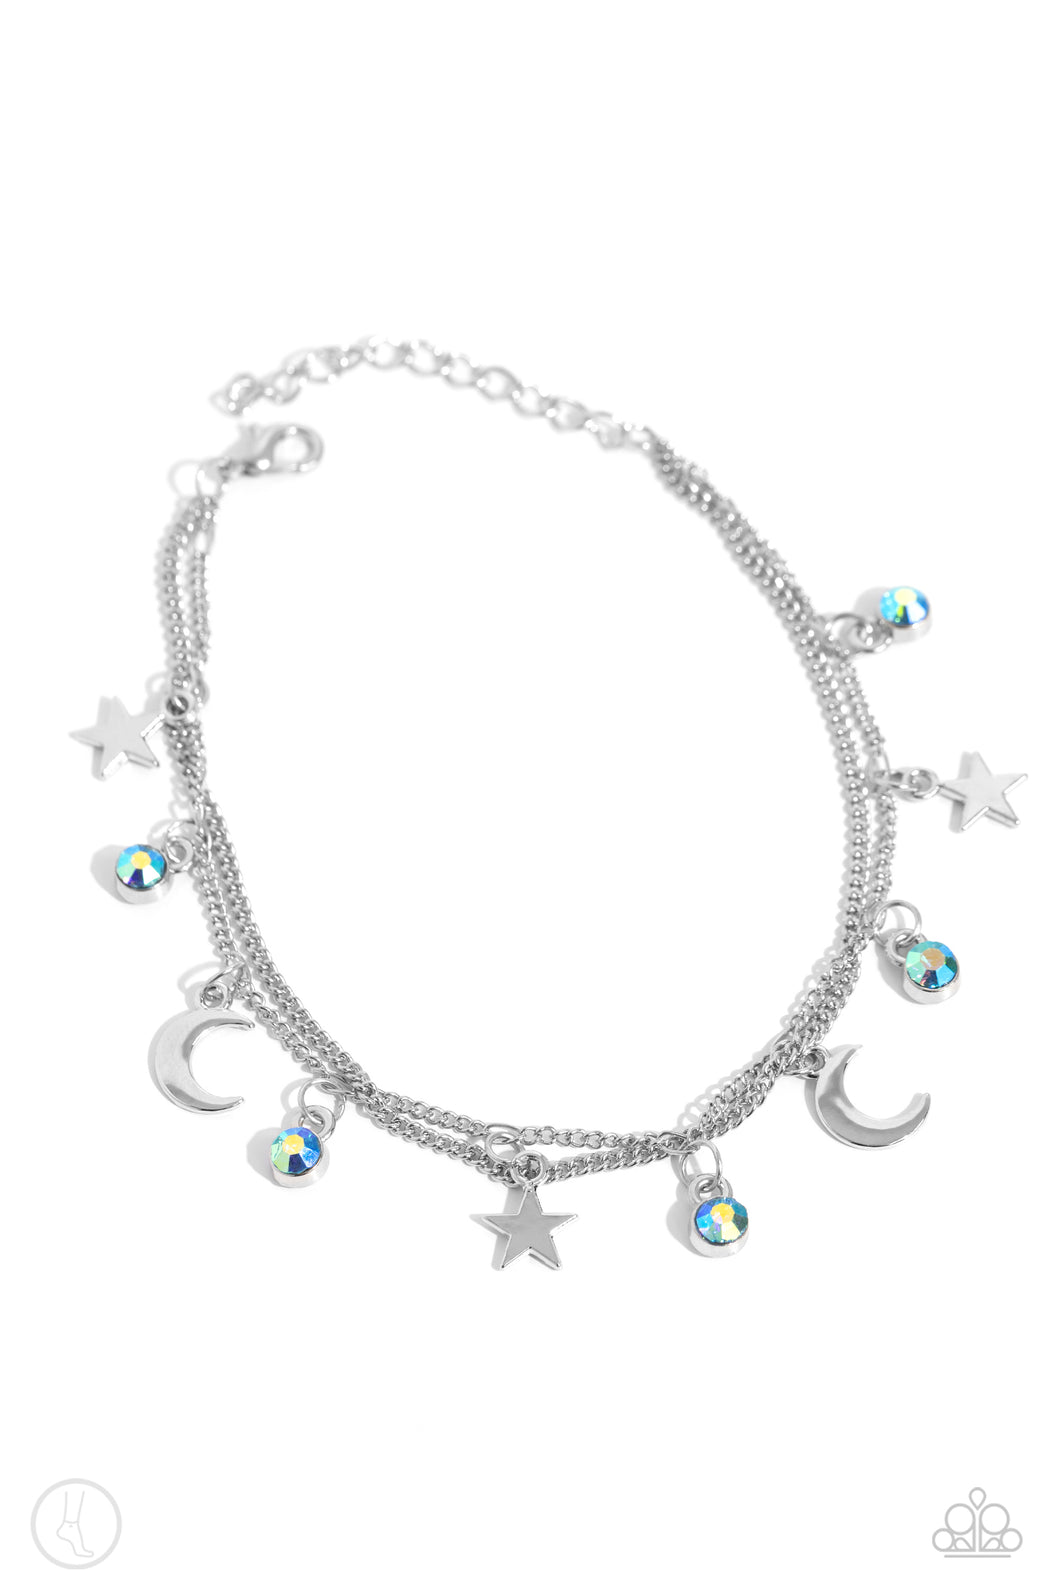 oak-sisters-jewelry-stellar-sashay-blue-anklet-paparazzi-accessories-by-lisa